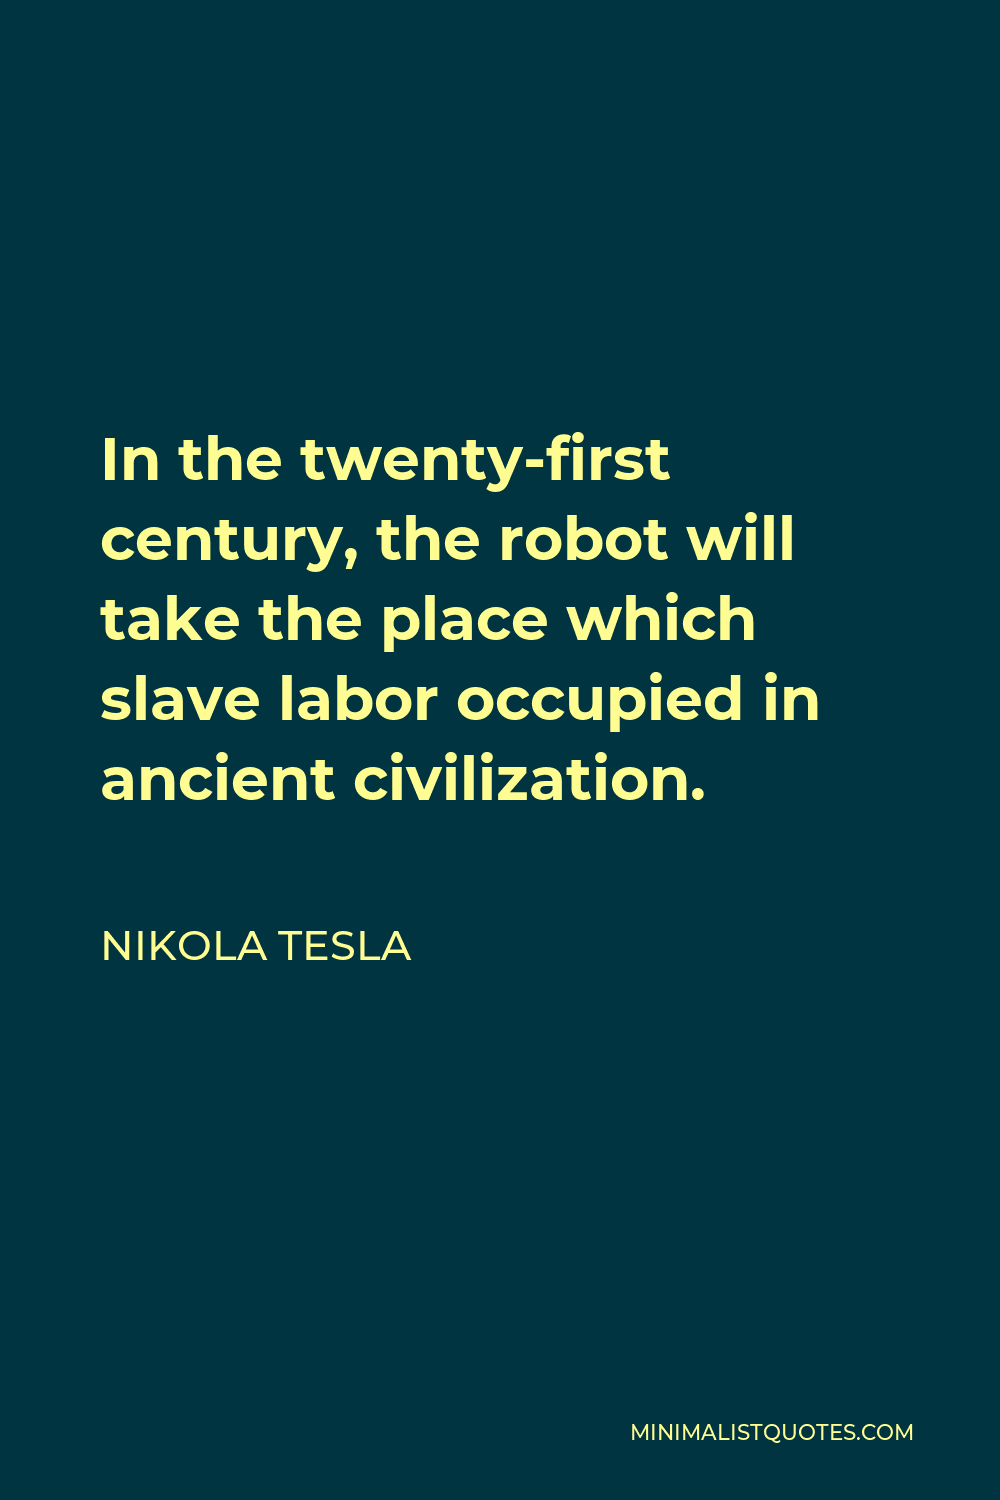 Nikola Tesla Quote - In the twenty-first century, the robot will take the place which slave labor occupied in ancient civilization.